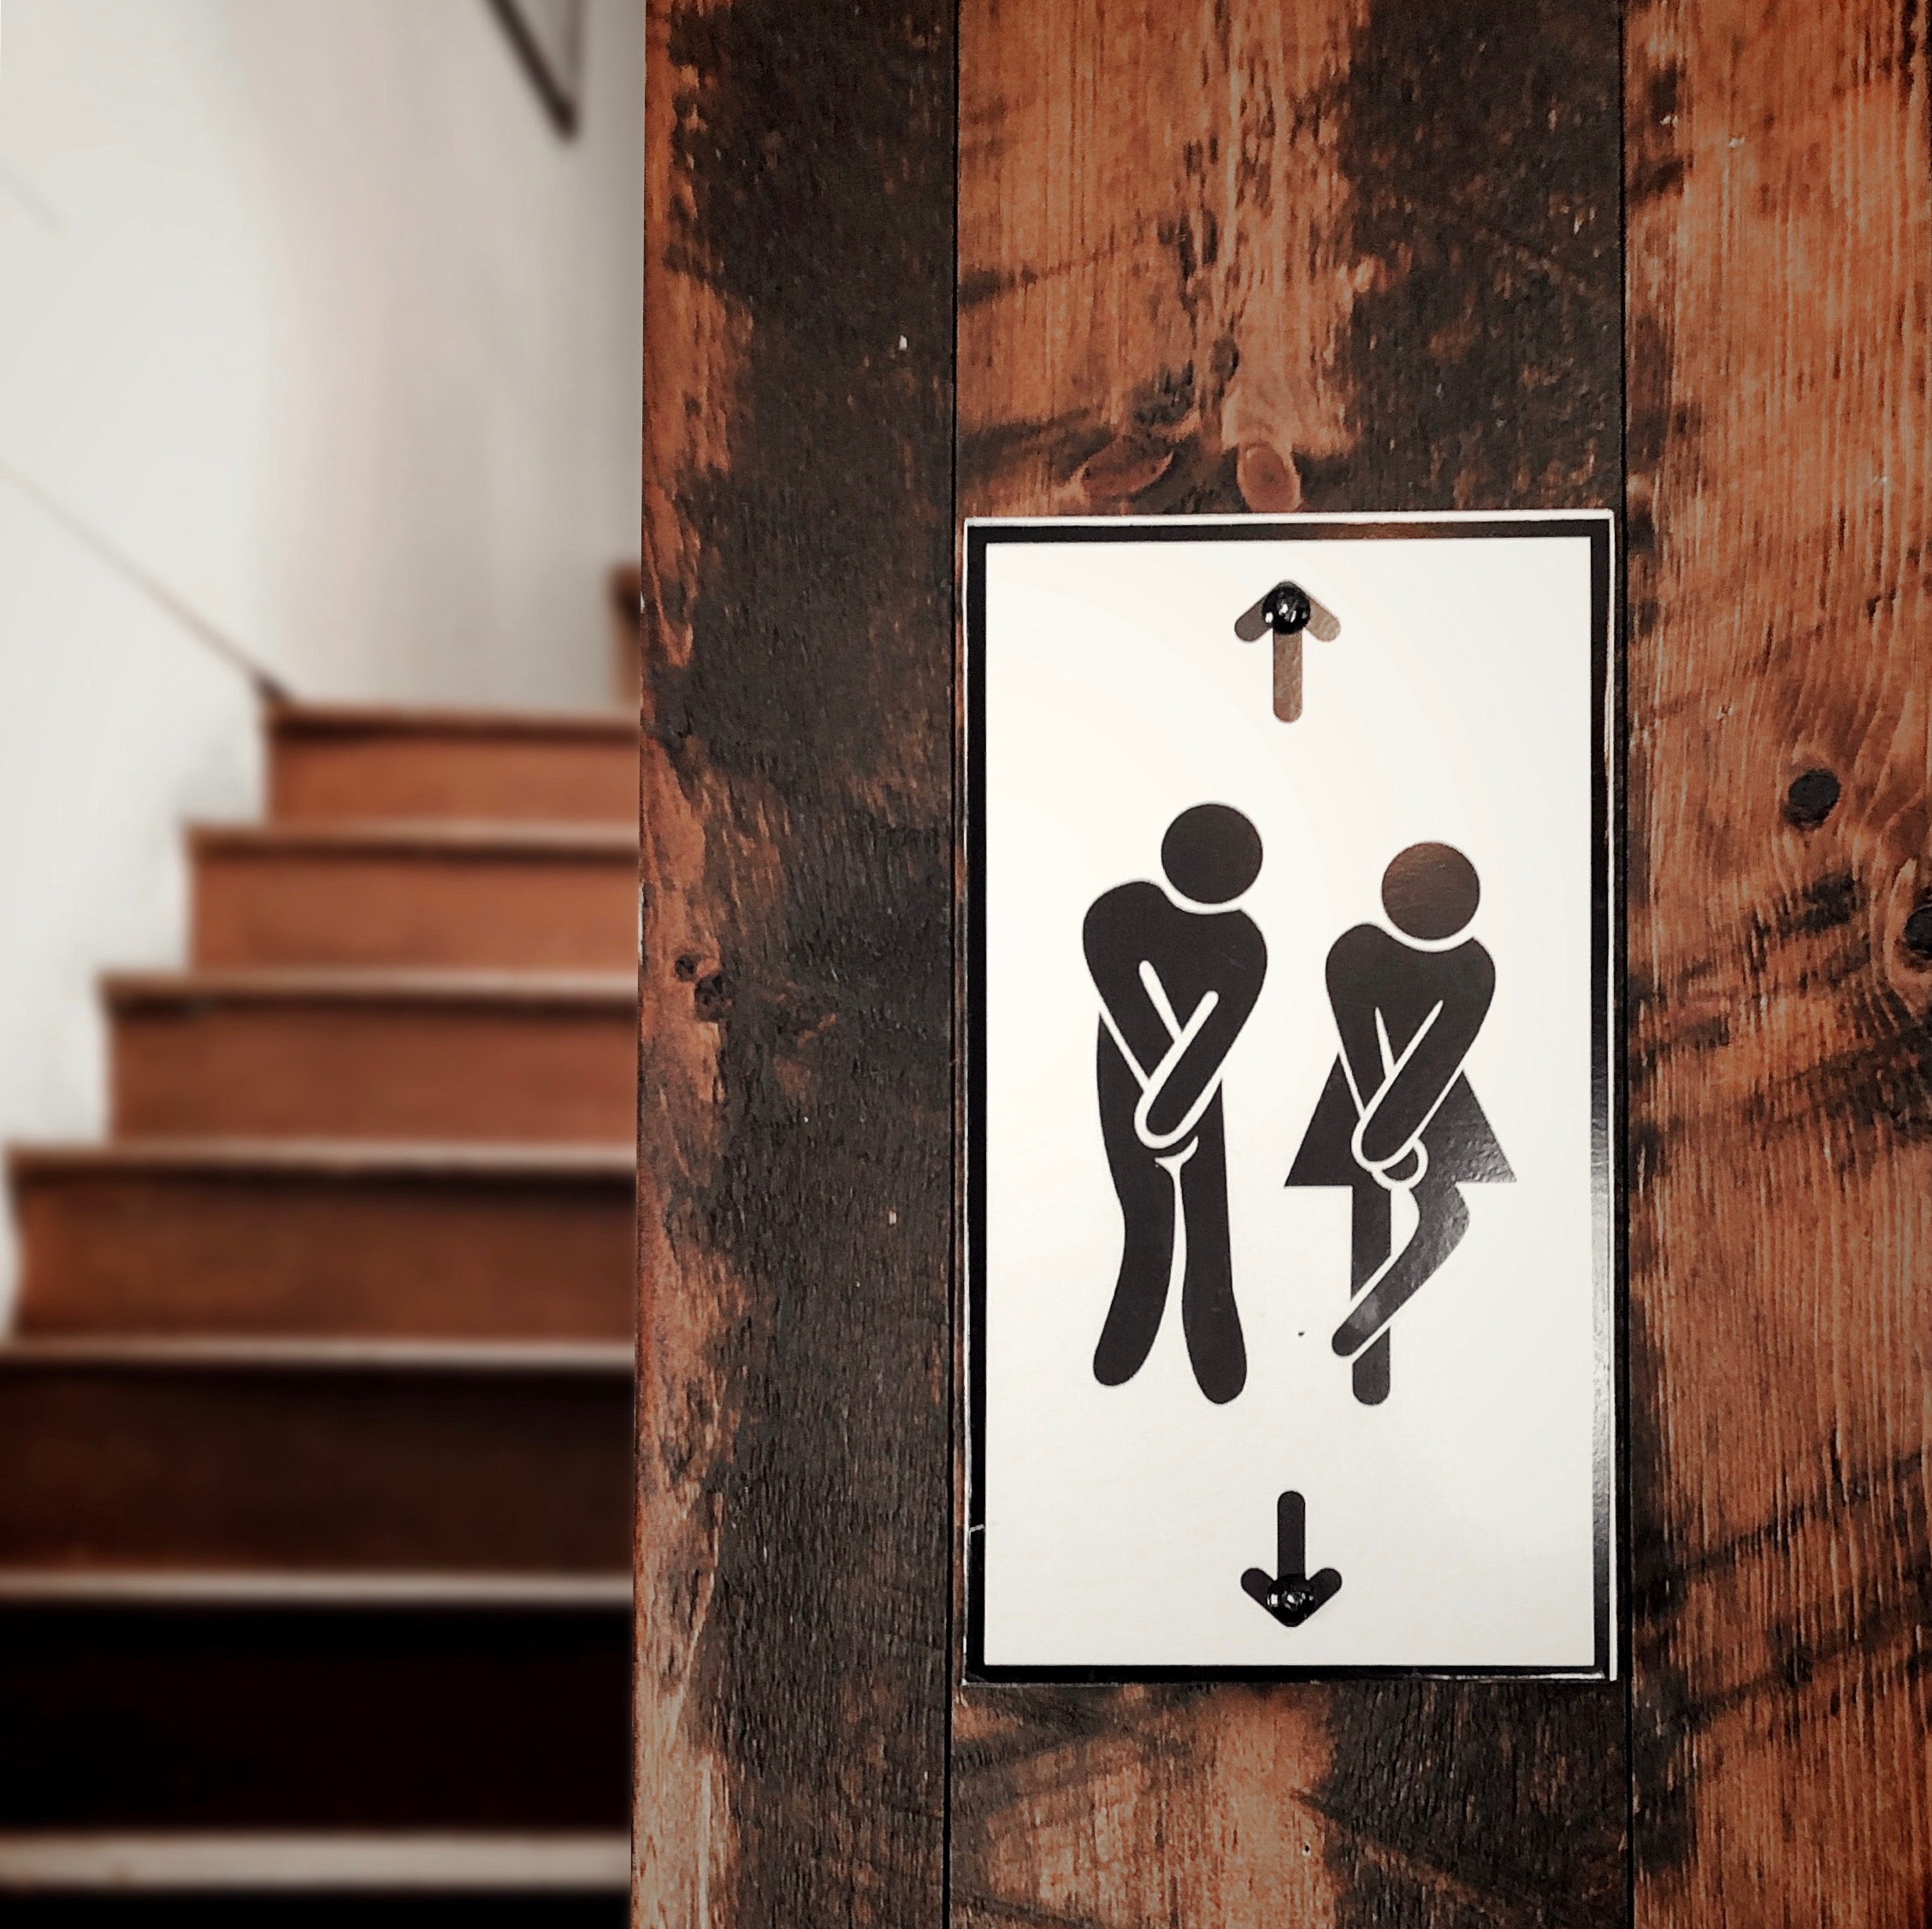 Bathrooms for customers only: Peeing with dignity in the city